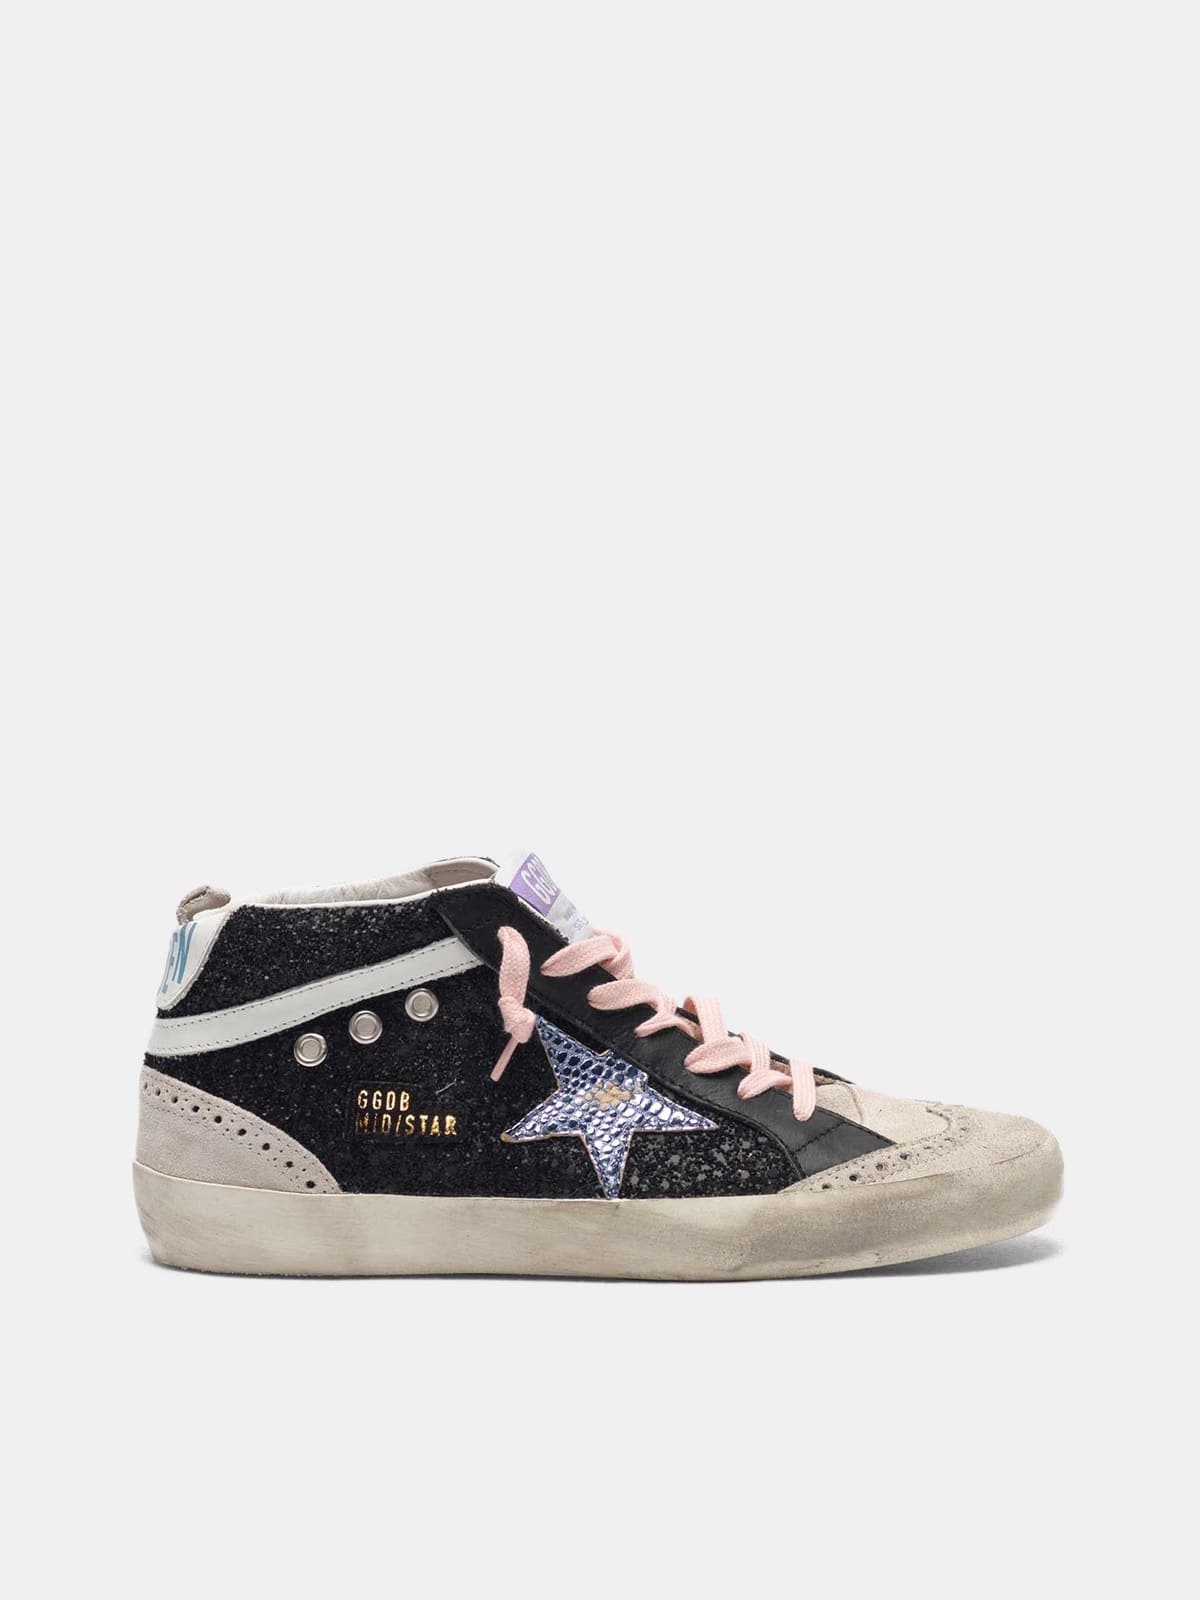 golden goose iridescent Black Mid-Star star sneakers with glitter and